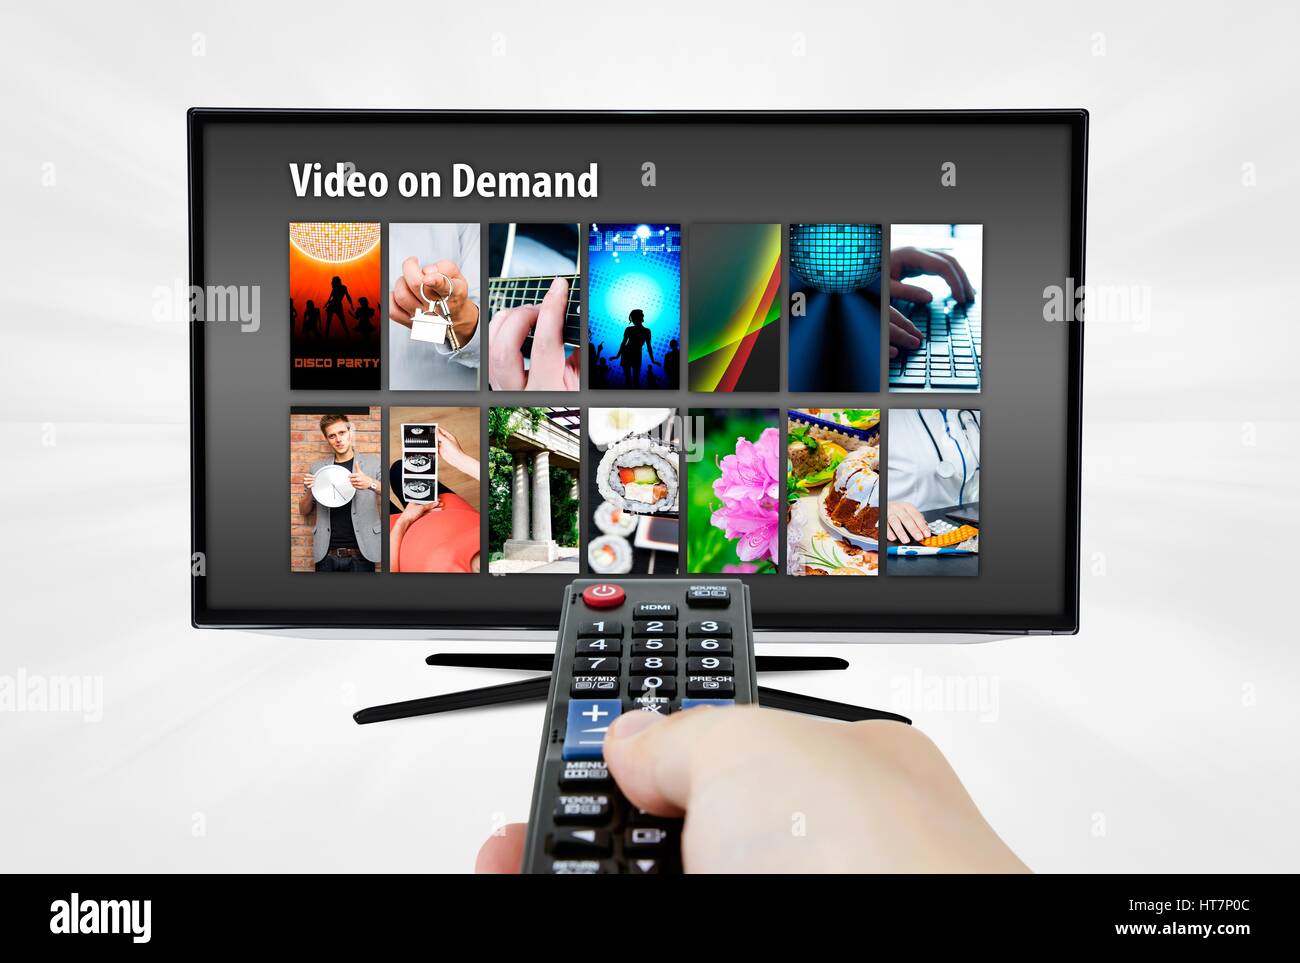 Video on demand VOD service on smart TV. Remote control in hand. Stock Photo